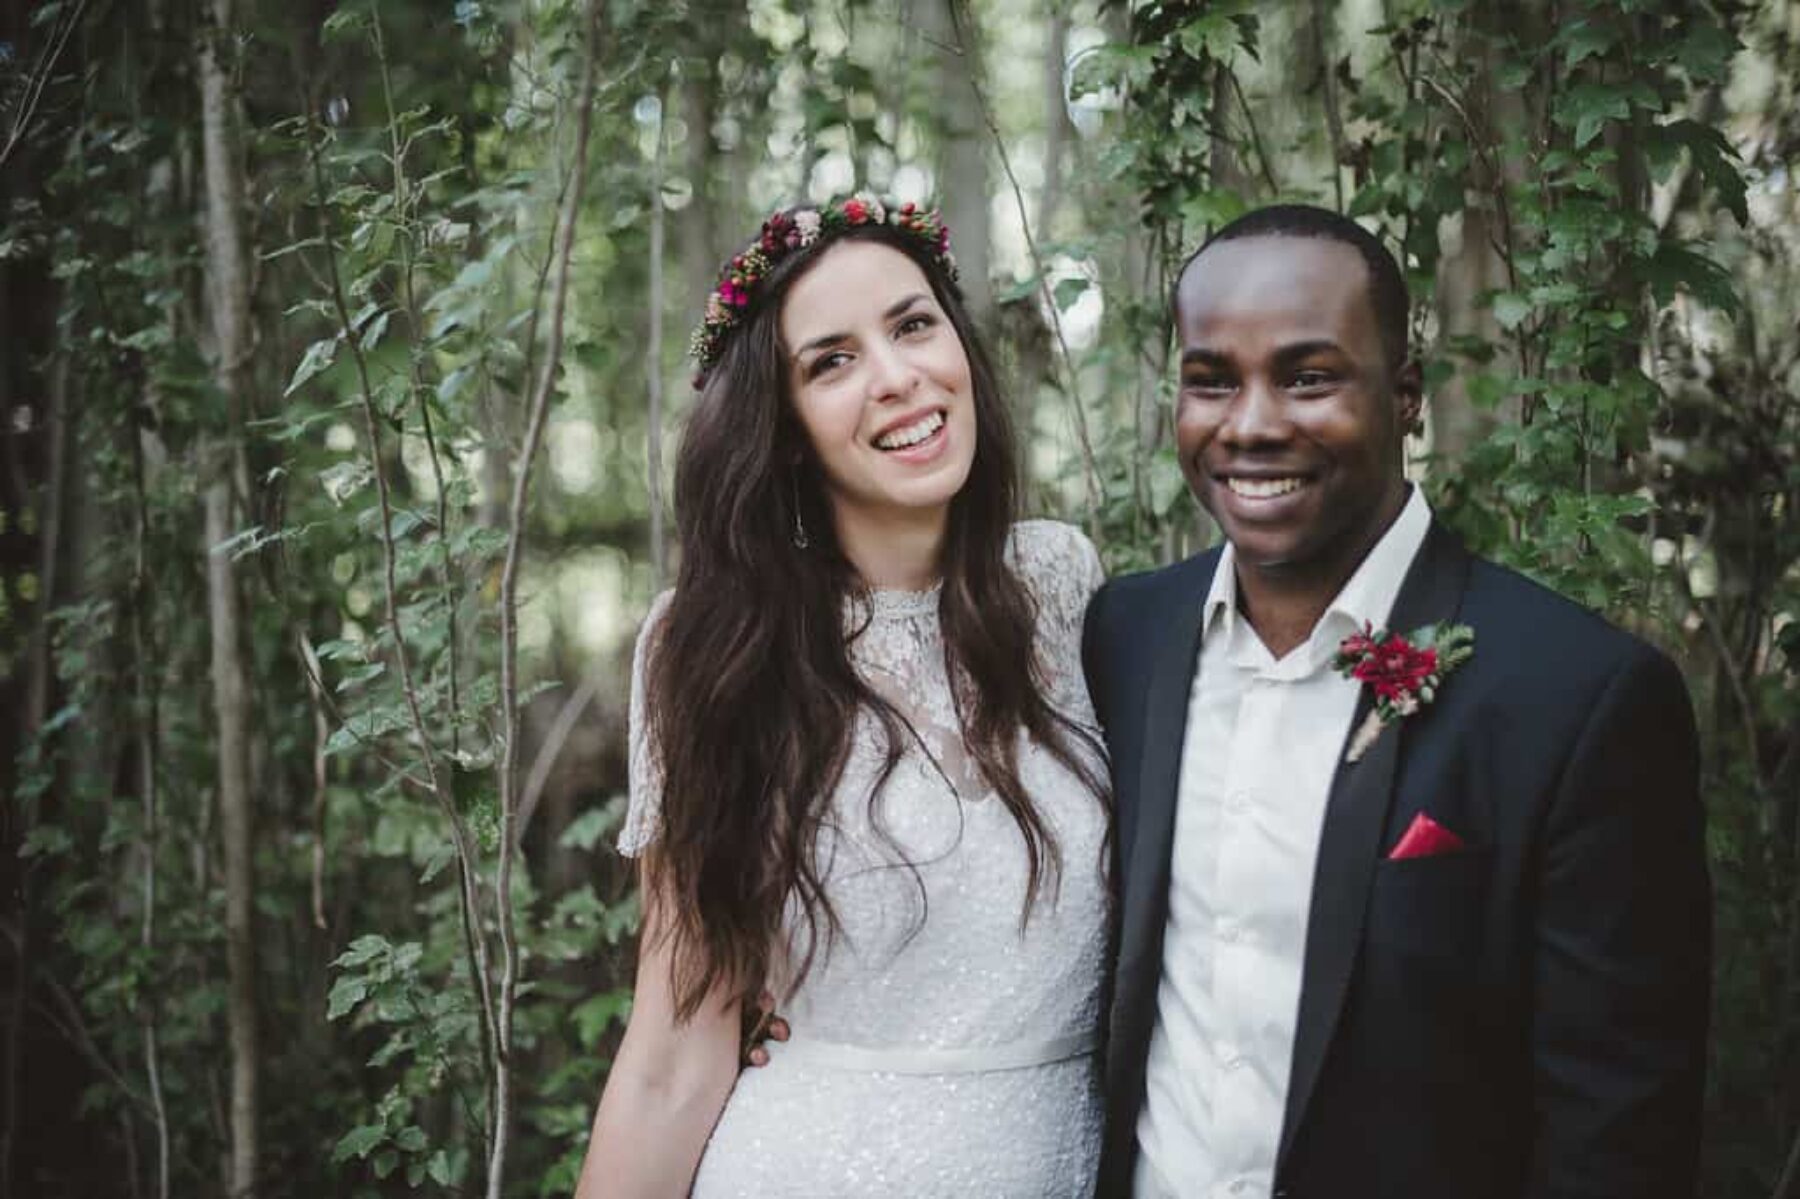 relaxed forest wedding - photography by Lauren Campbell